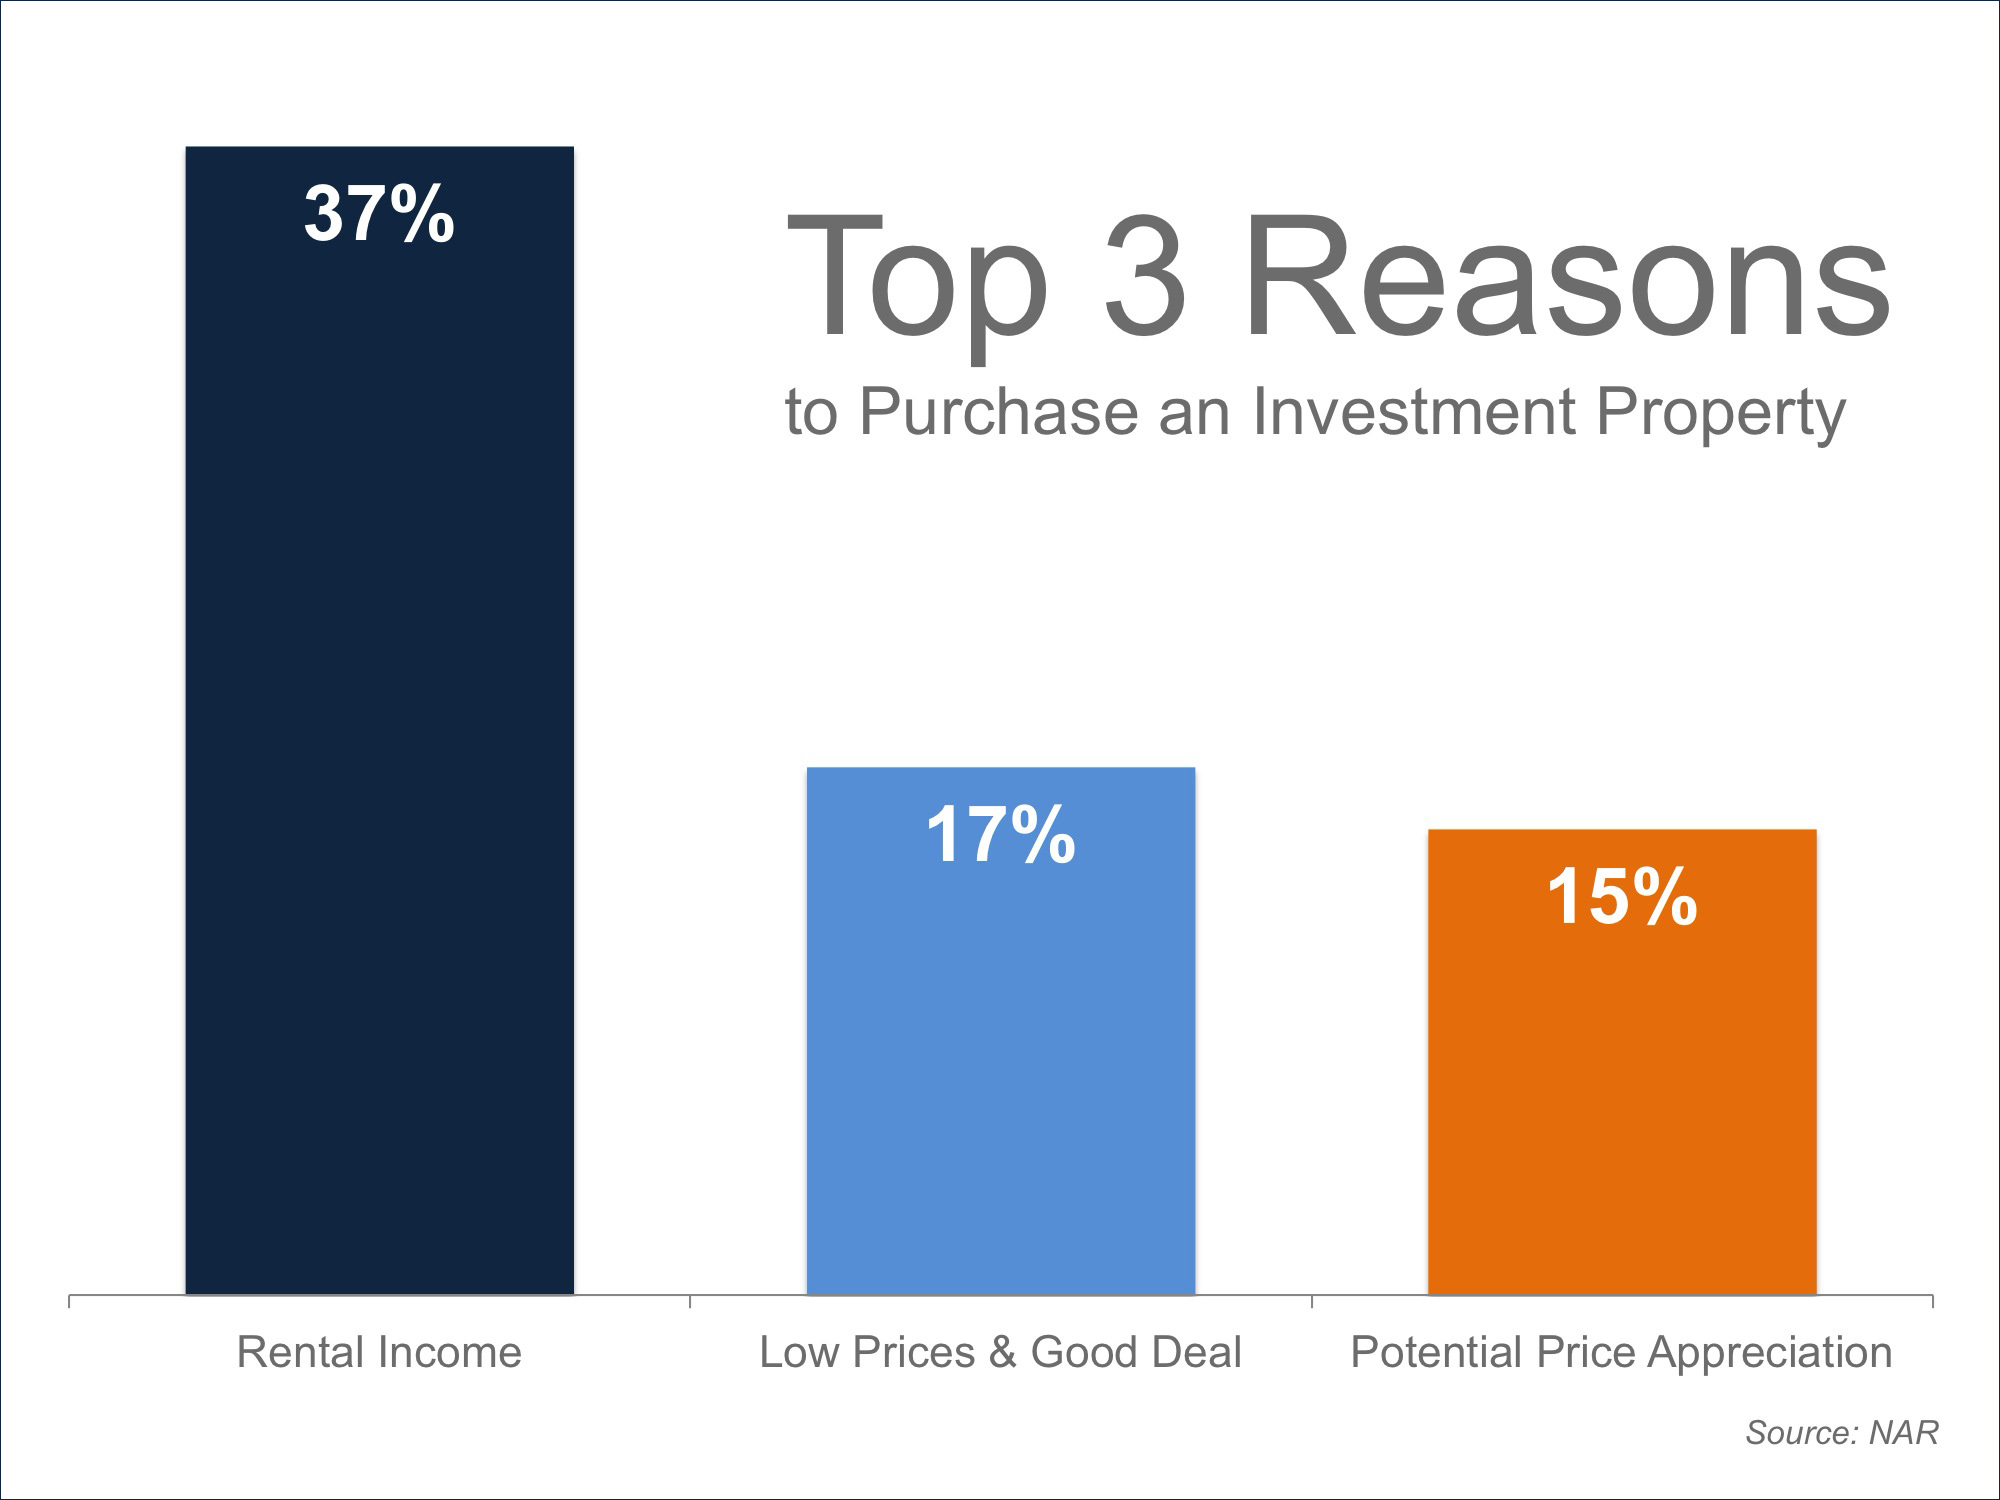 Top 3 Reasons to Purchase | Simplifying The Market